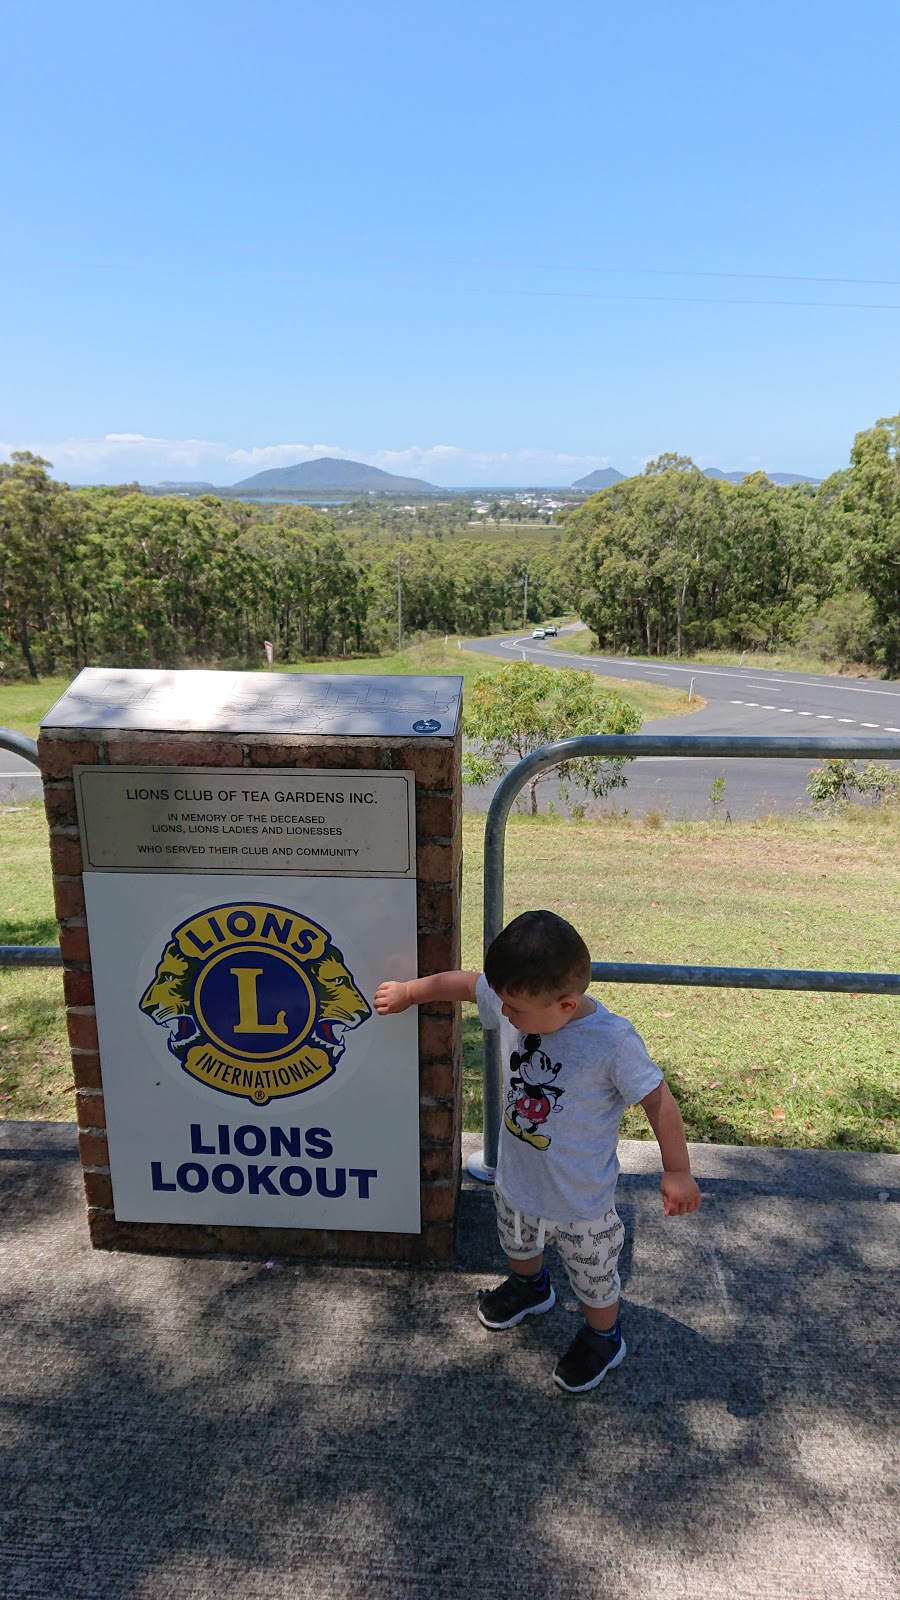 Lions Club Lookout - Unnamed Road, Tea Gardens NSW 2324, Australia